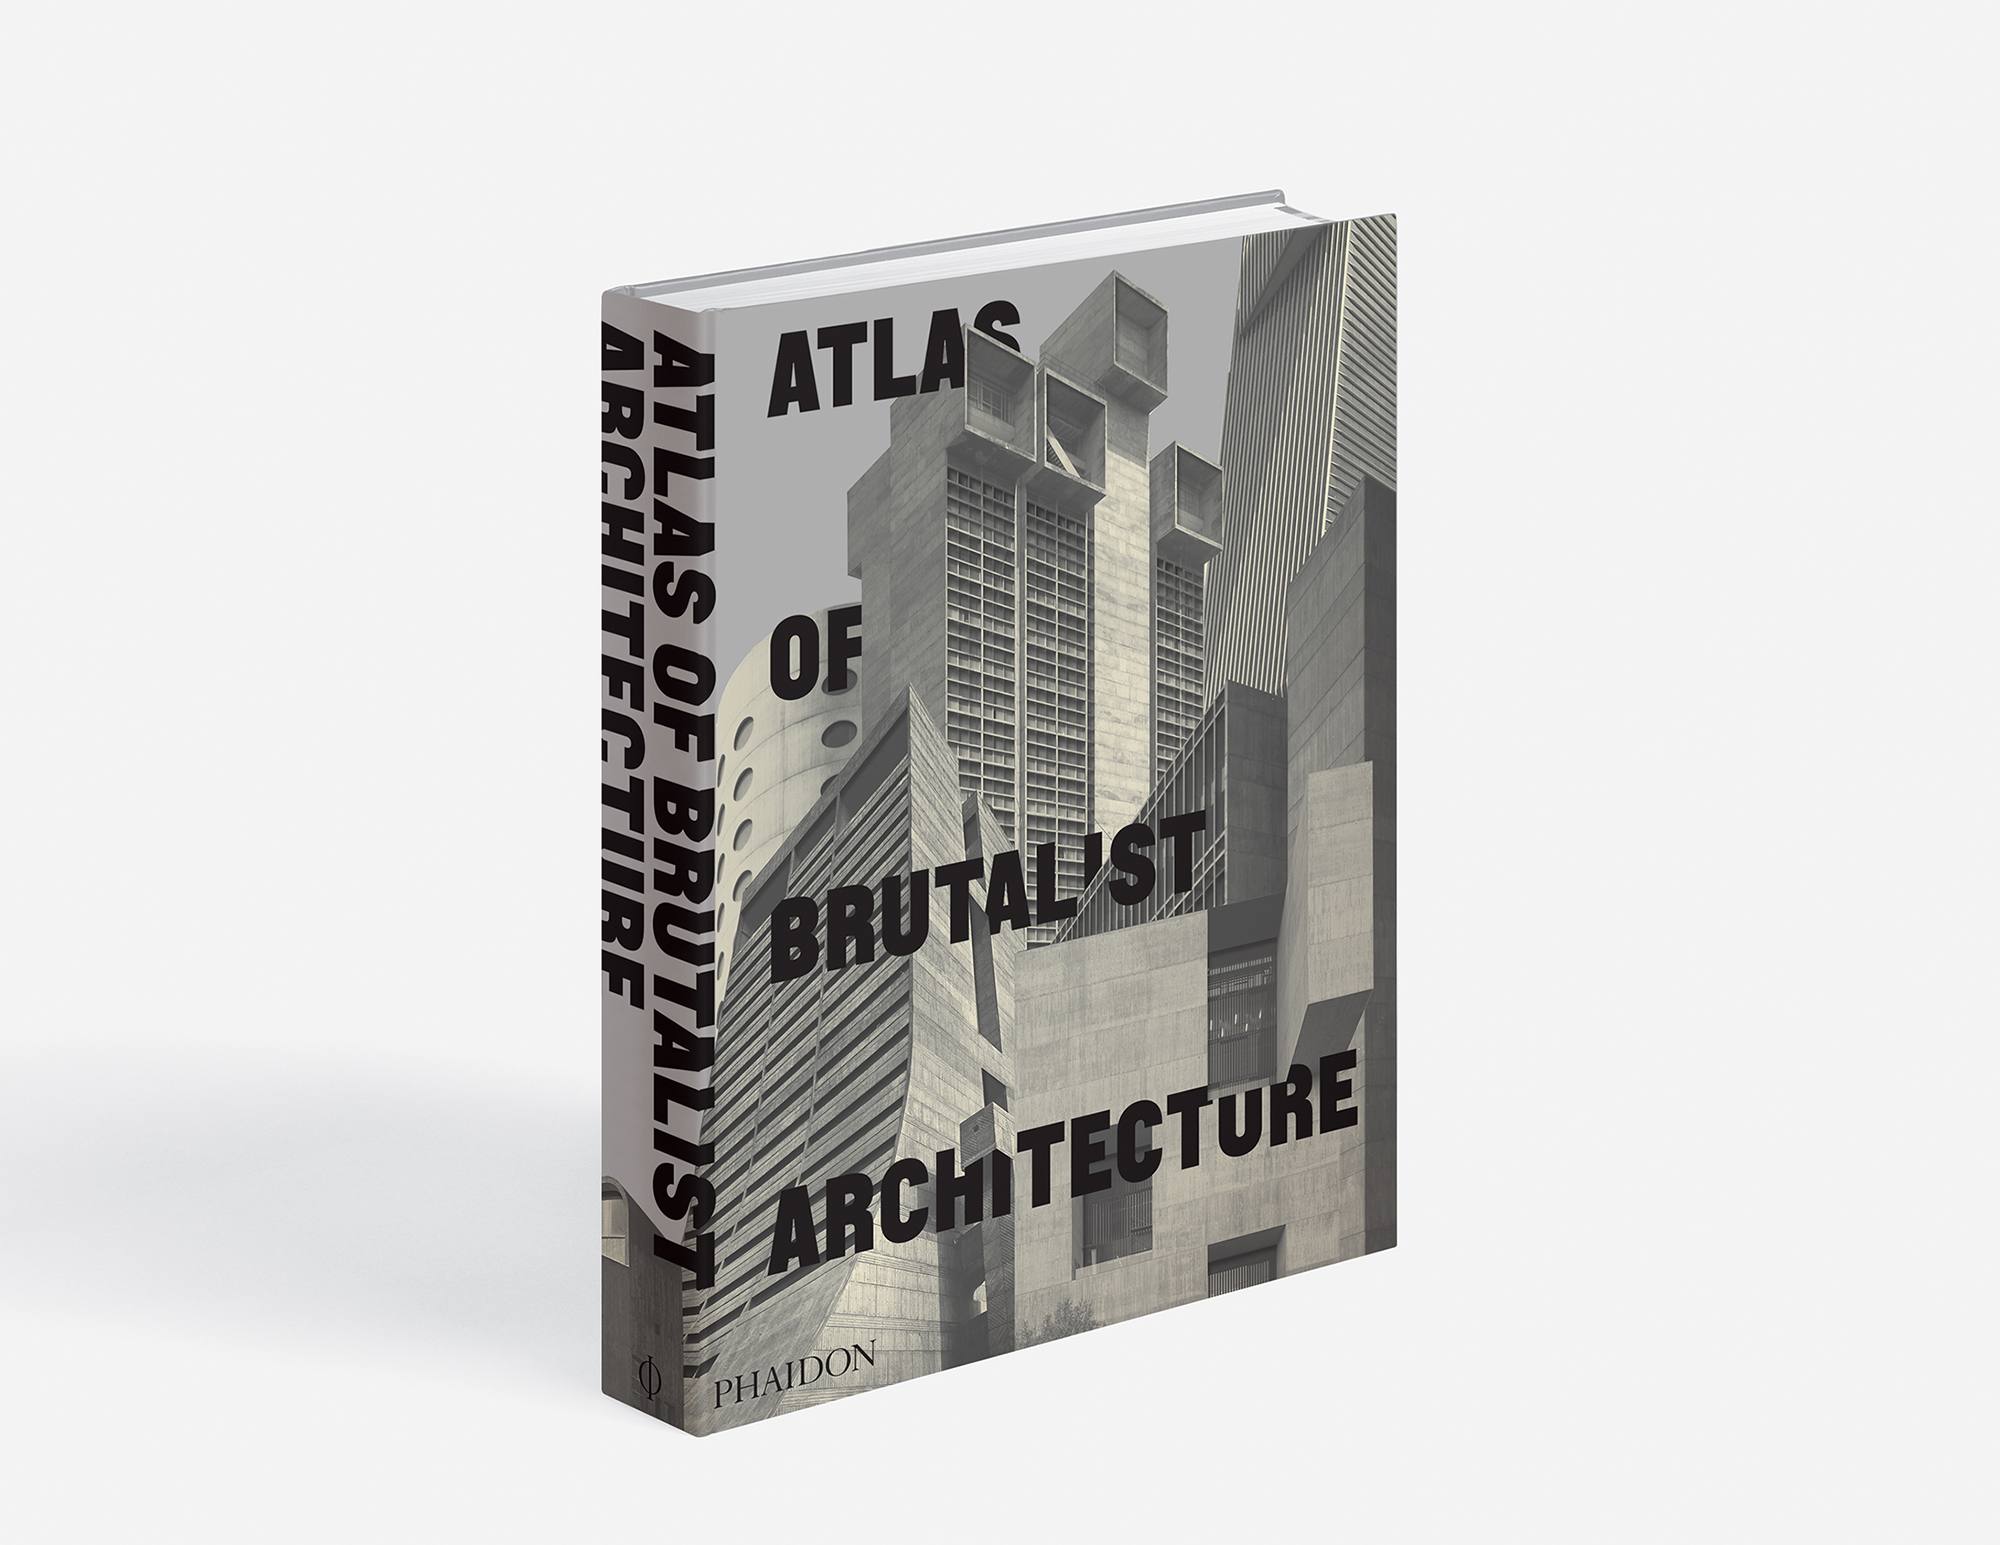 The Atlas of Brutalist Architecture